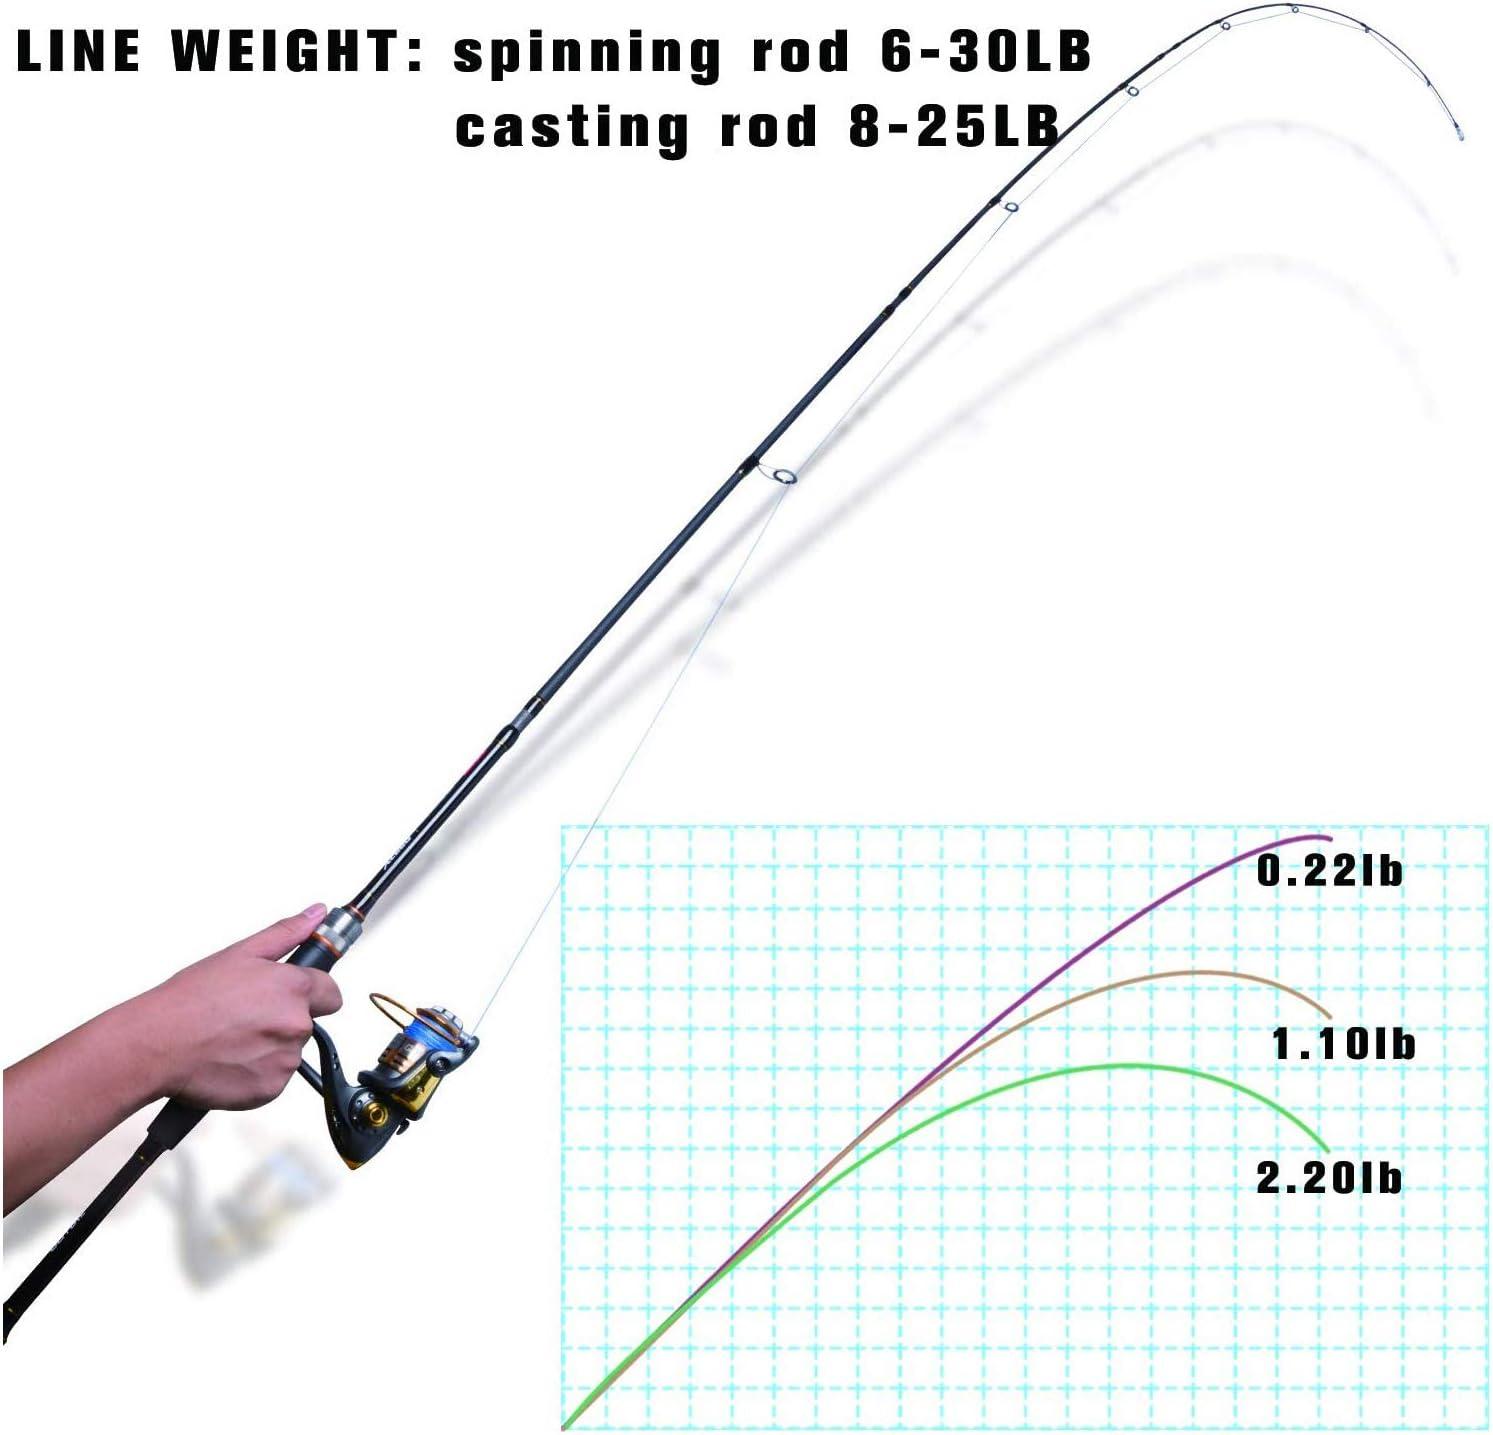 Goture Travel Fishing Rods 2 Piece/4 Piece Fishing Pole with Case/Bag Fly  Fishing Kit/Surf Casting/Spinning Rod Ultralight Fishing Baitcast Rod 6ft- 12ft for Saltwater Trout Bass Walleye Pike 4 Piece Fishing Rod Dark